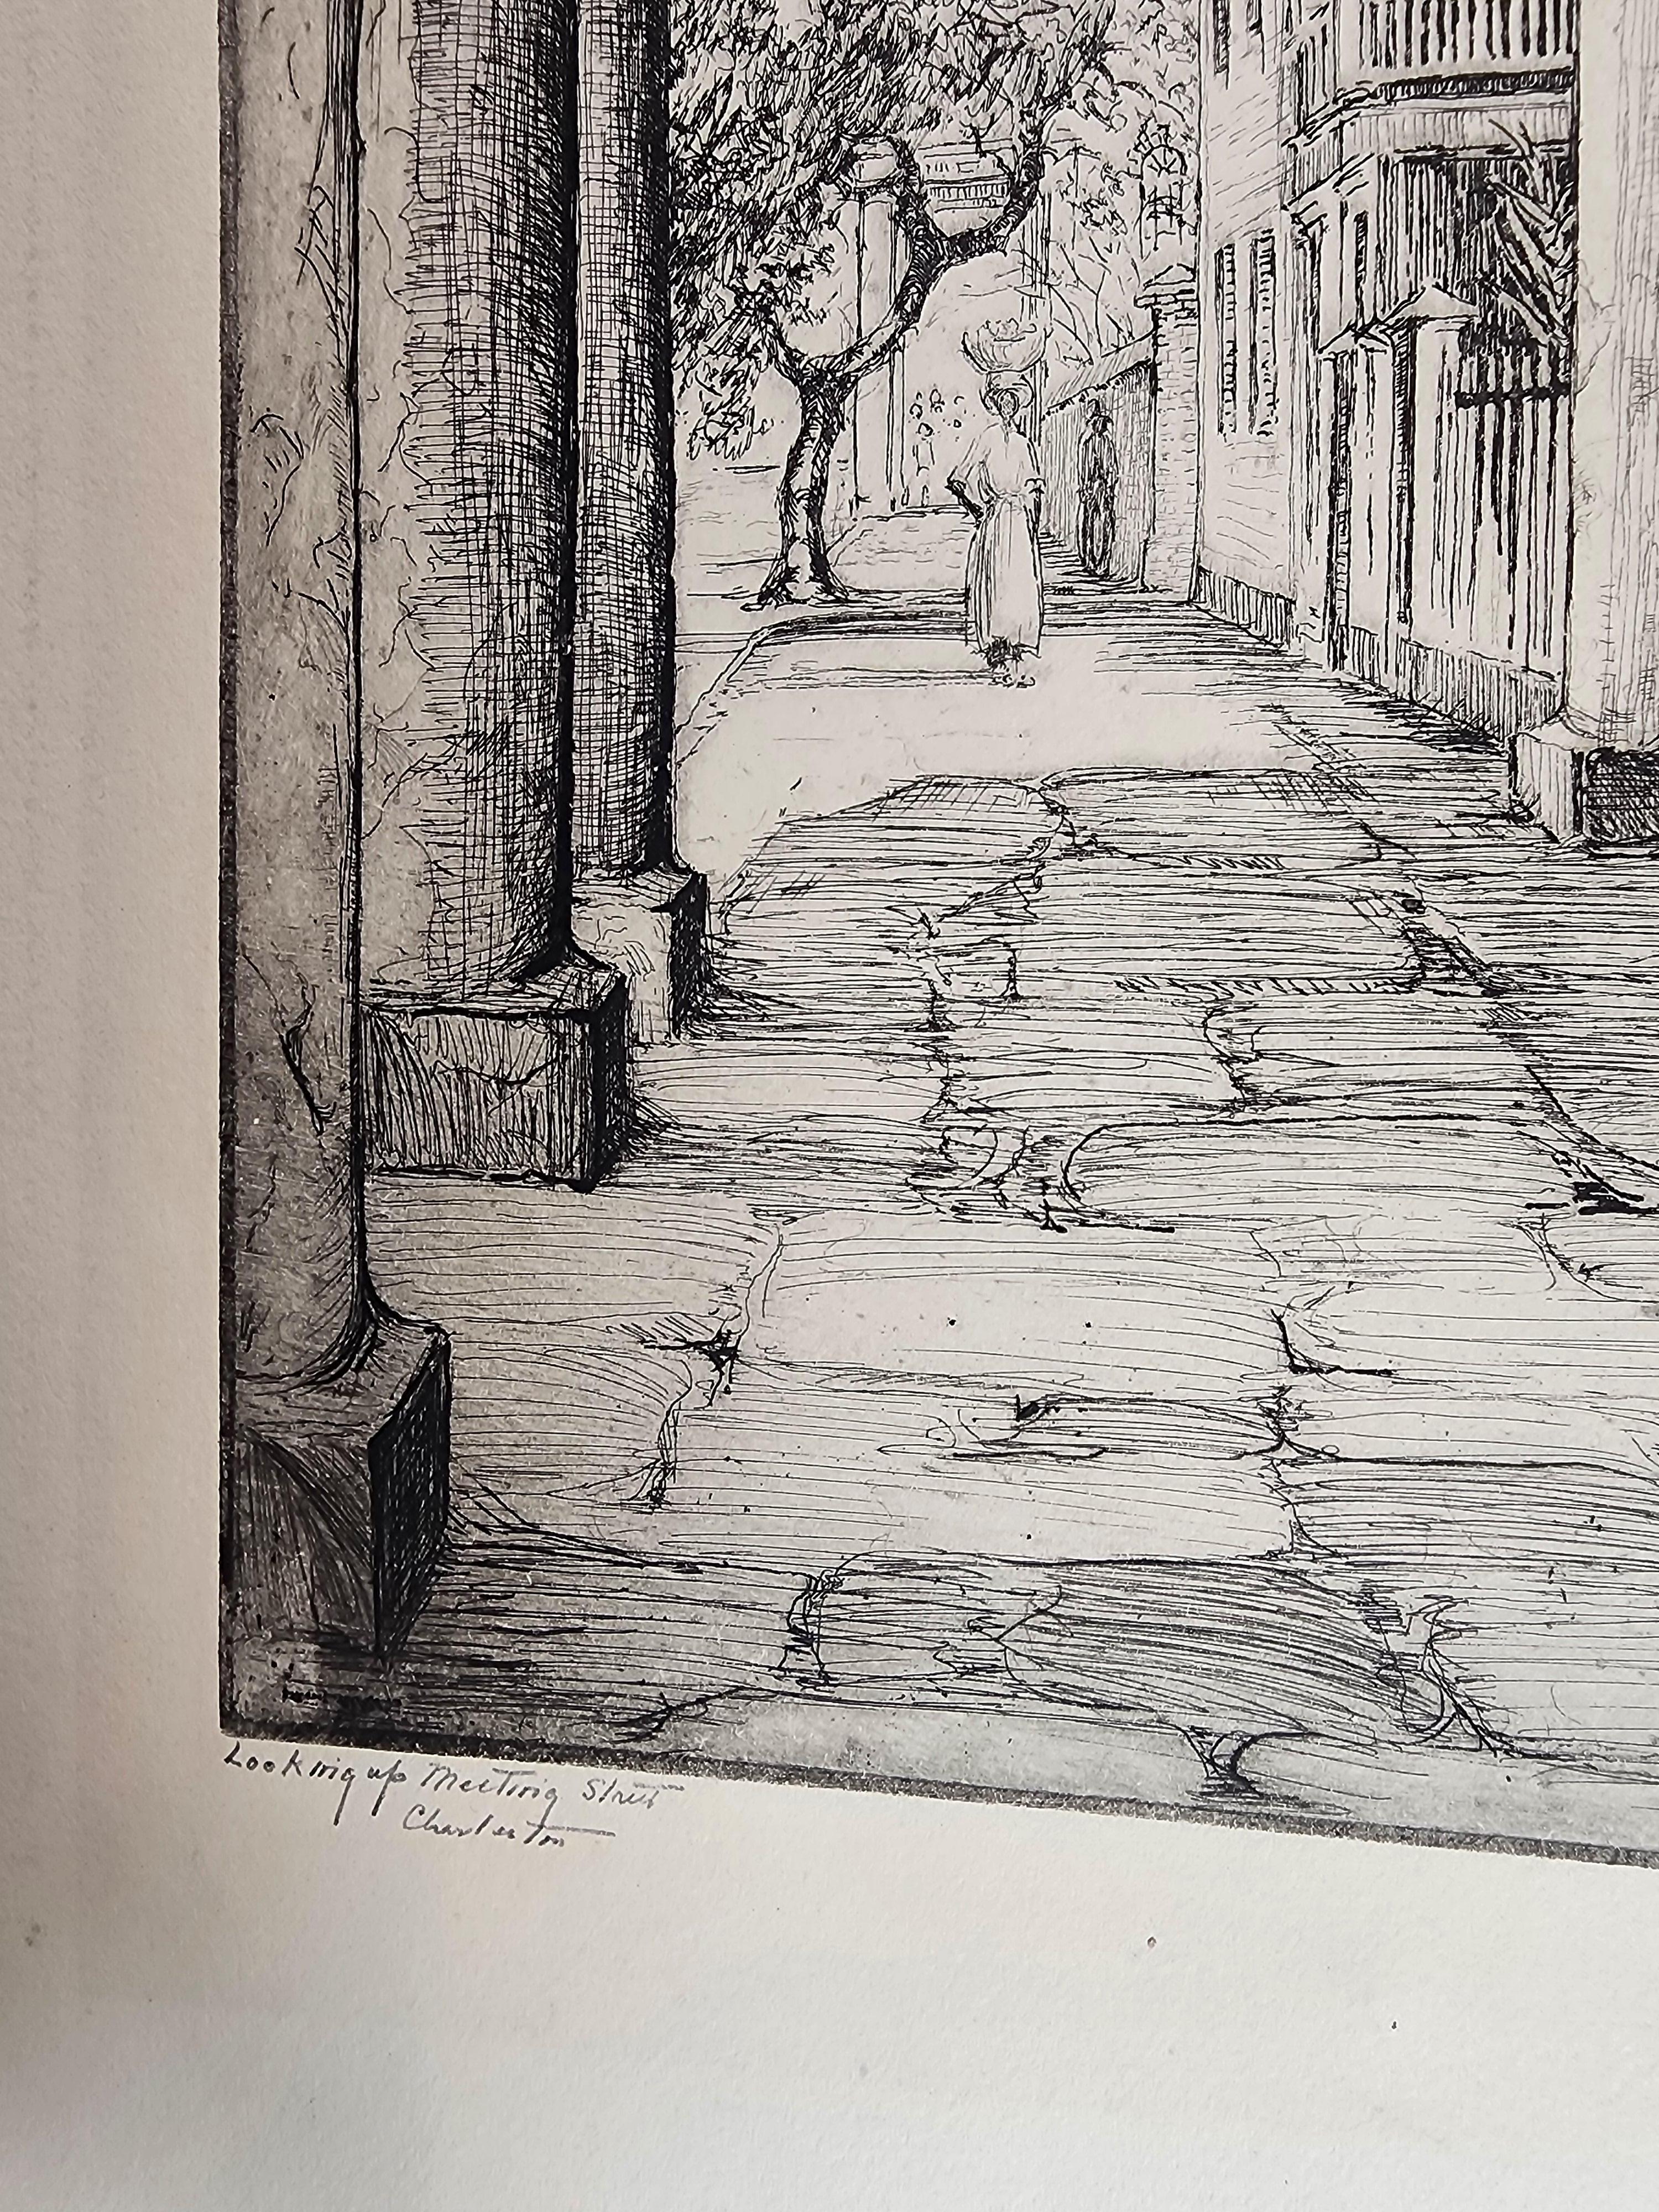 Looking Up Meeting Street - Charleston by Elizabeth o'details showing. 
A dark richly inked impression with all the fine ddetails showing.
Some light staining as shown in the photos.